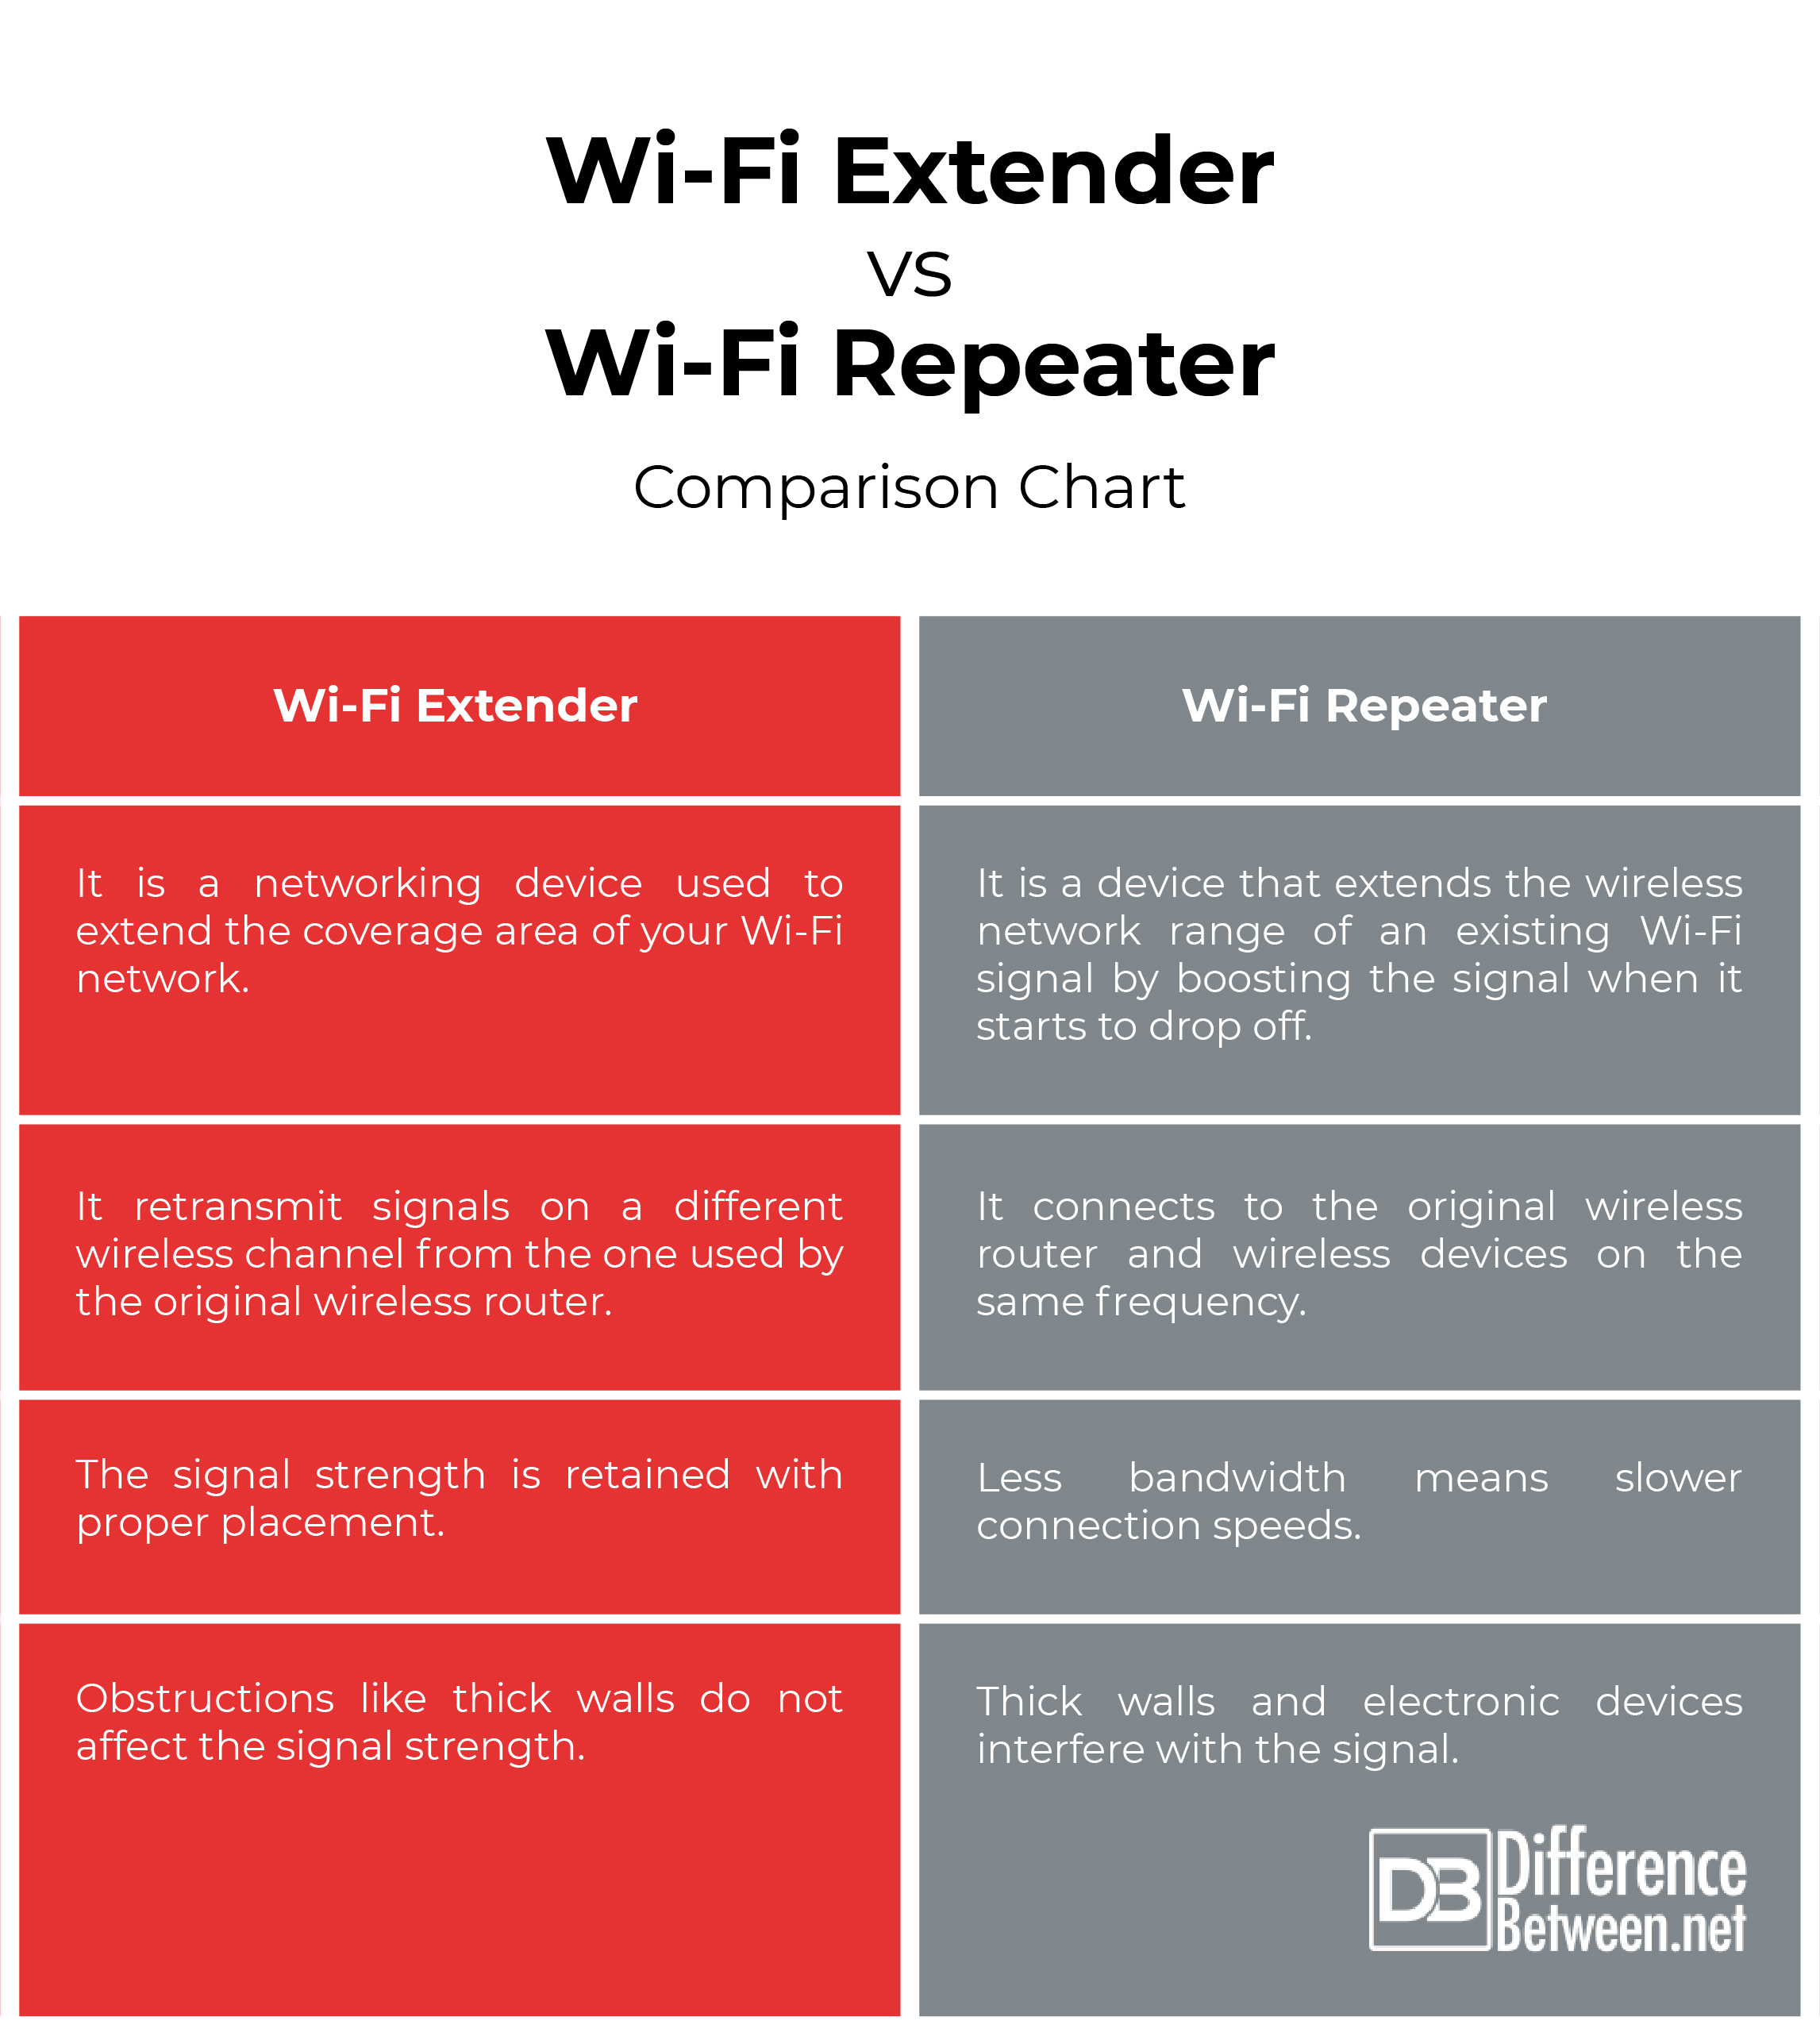 WiFi Booster VS WiFi Extender: Any Differences between them